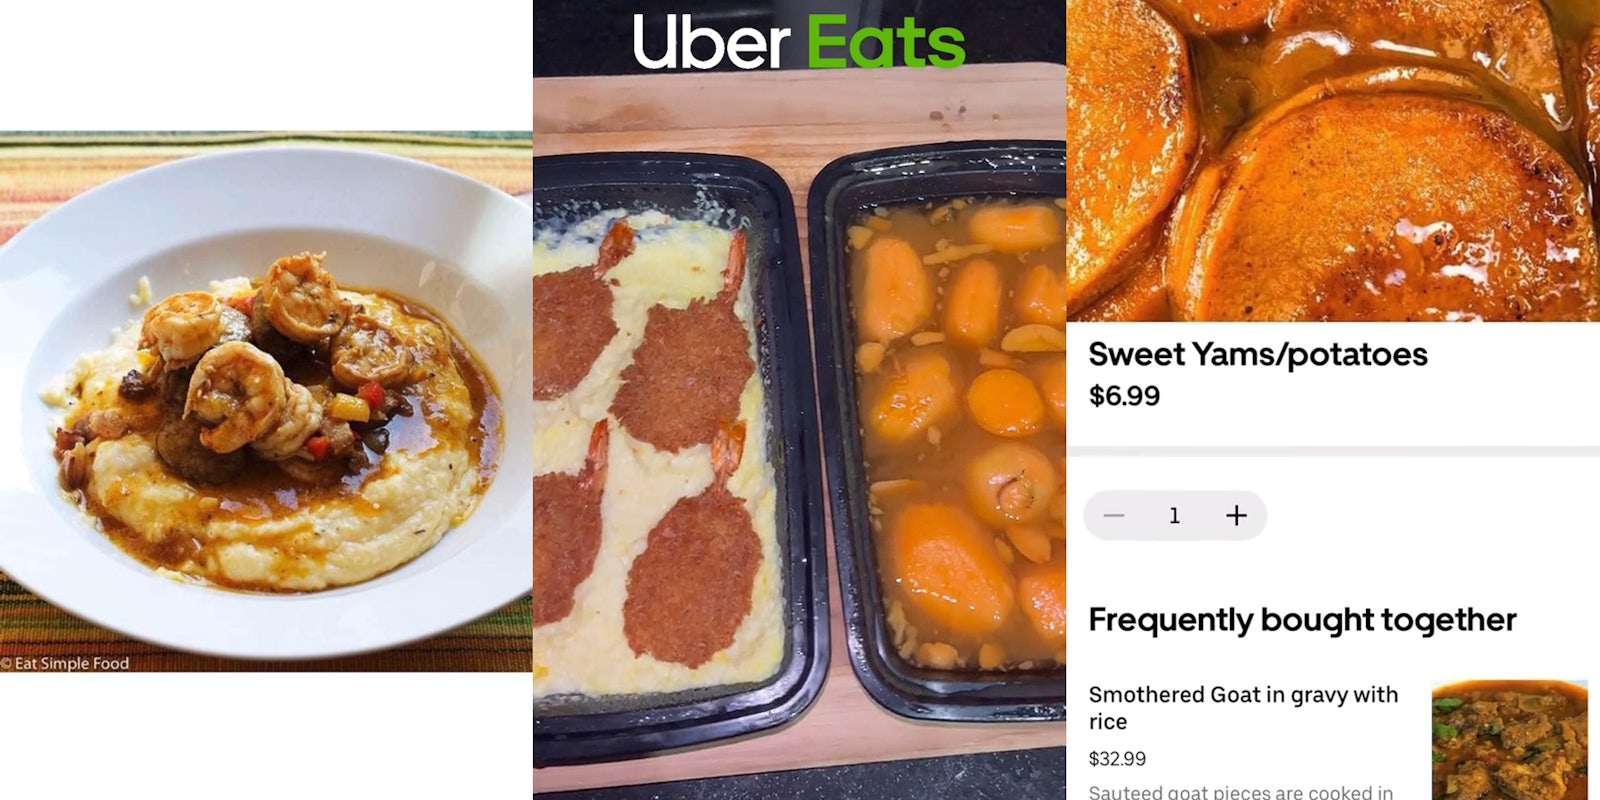 Uber Eats image of shrimp and grits in bowl with water mark on left side (l) Uber Eats logo at top of image of two black containers on table shrimp and grits left and yams right (c) Uber Eats sweet potatoes ad for restaurant (r)